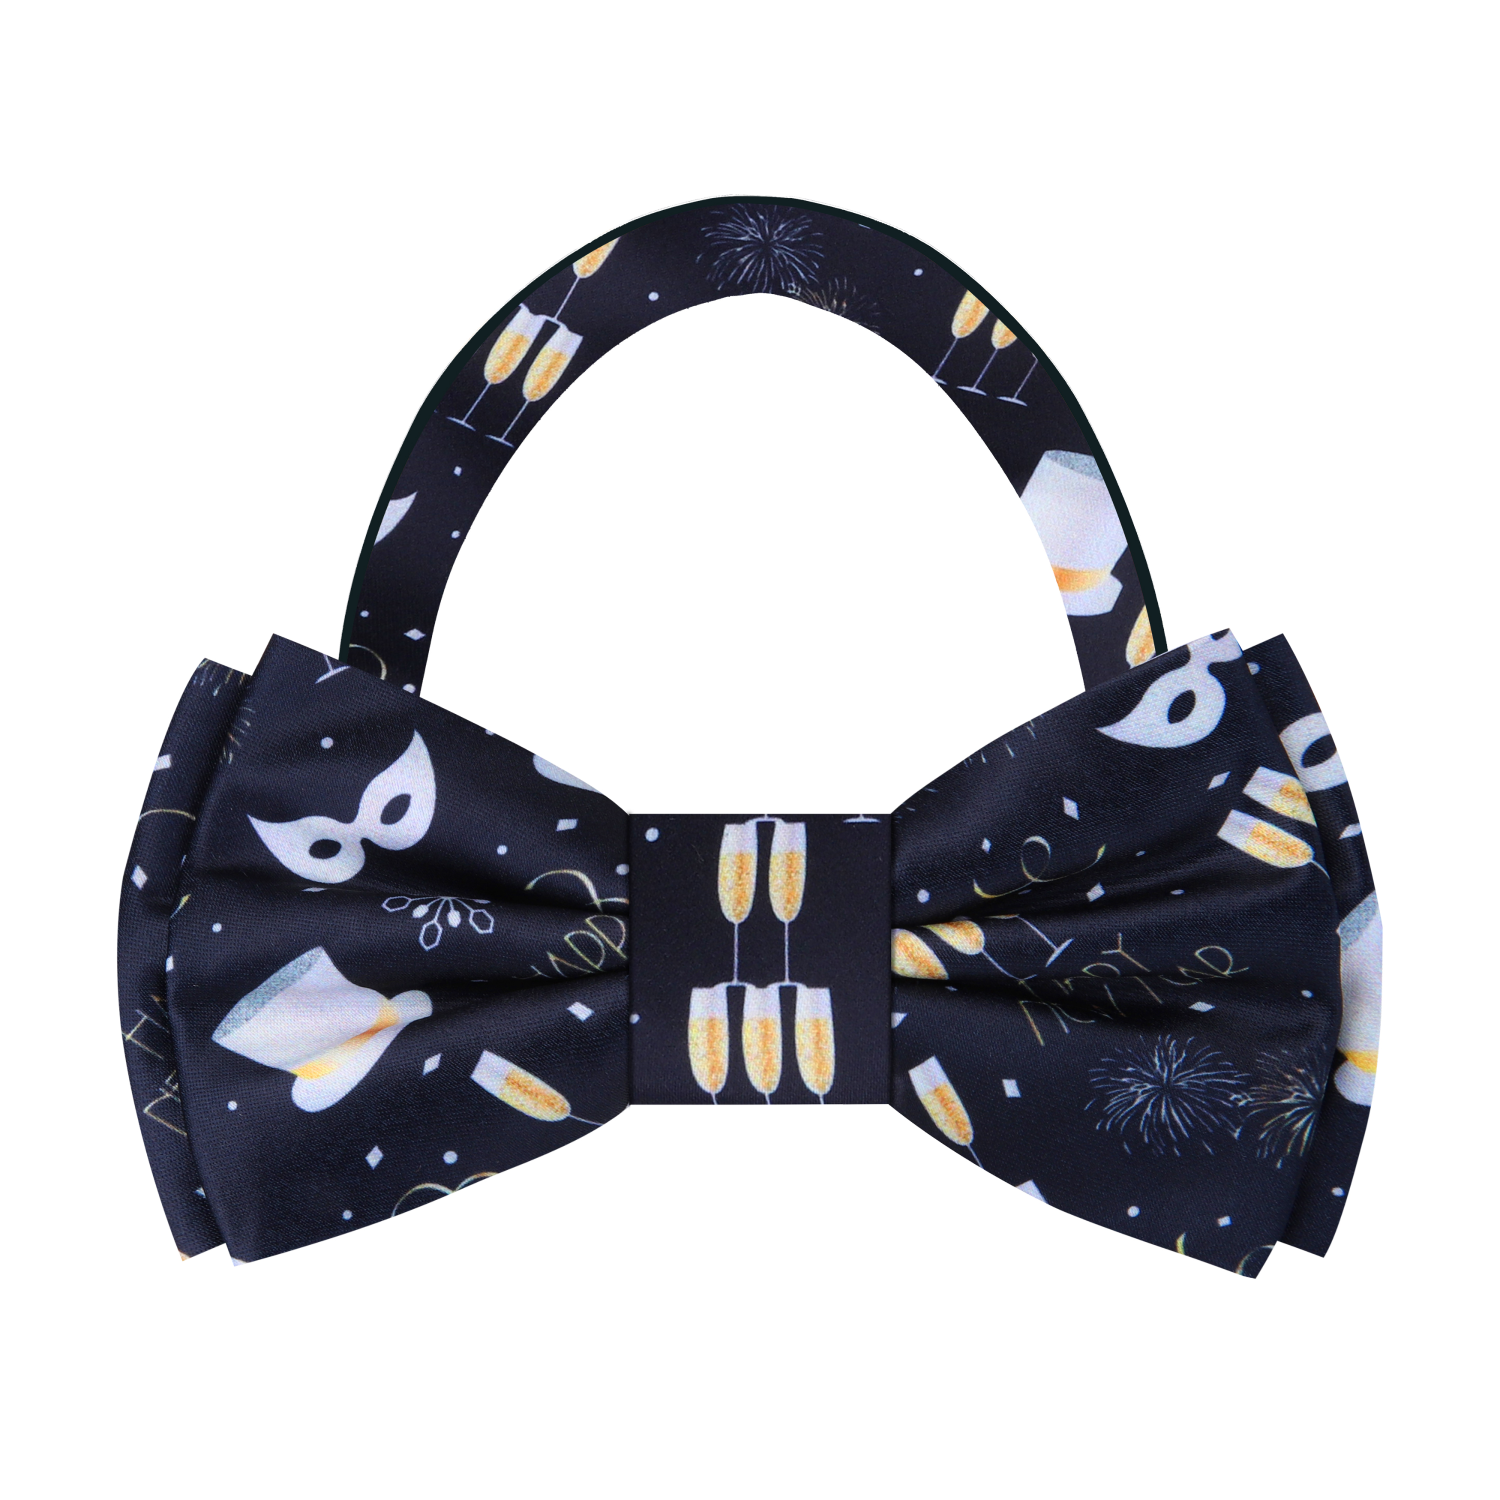 Black, White and Gold Champagne, Mask, Hat, Fireworks Happy New Year Bow Tie Pre Tied